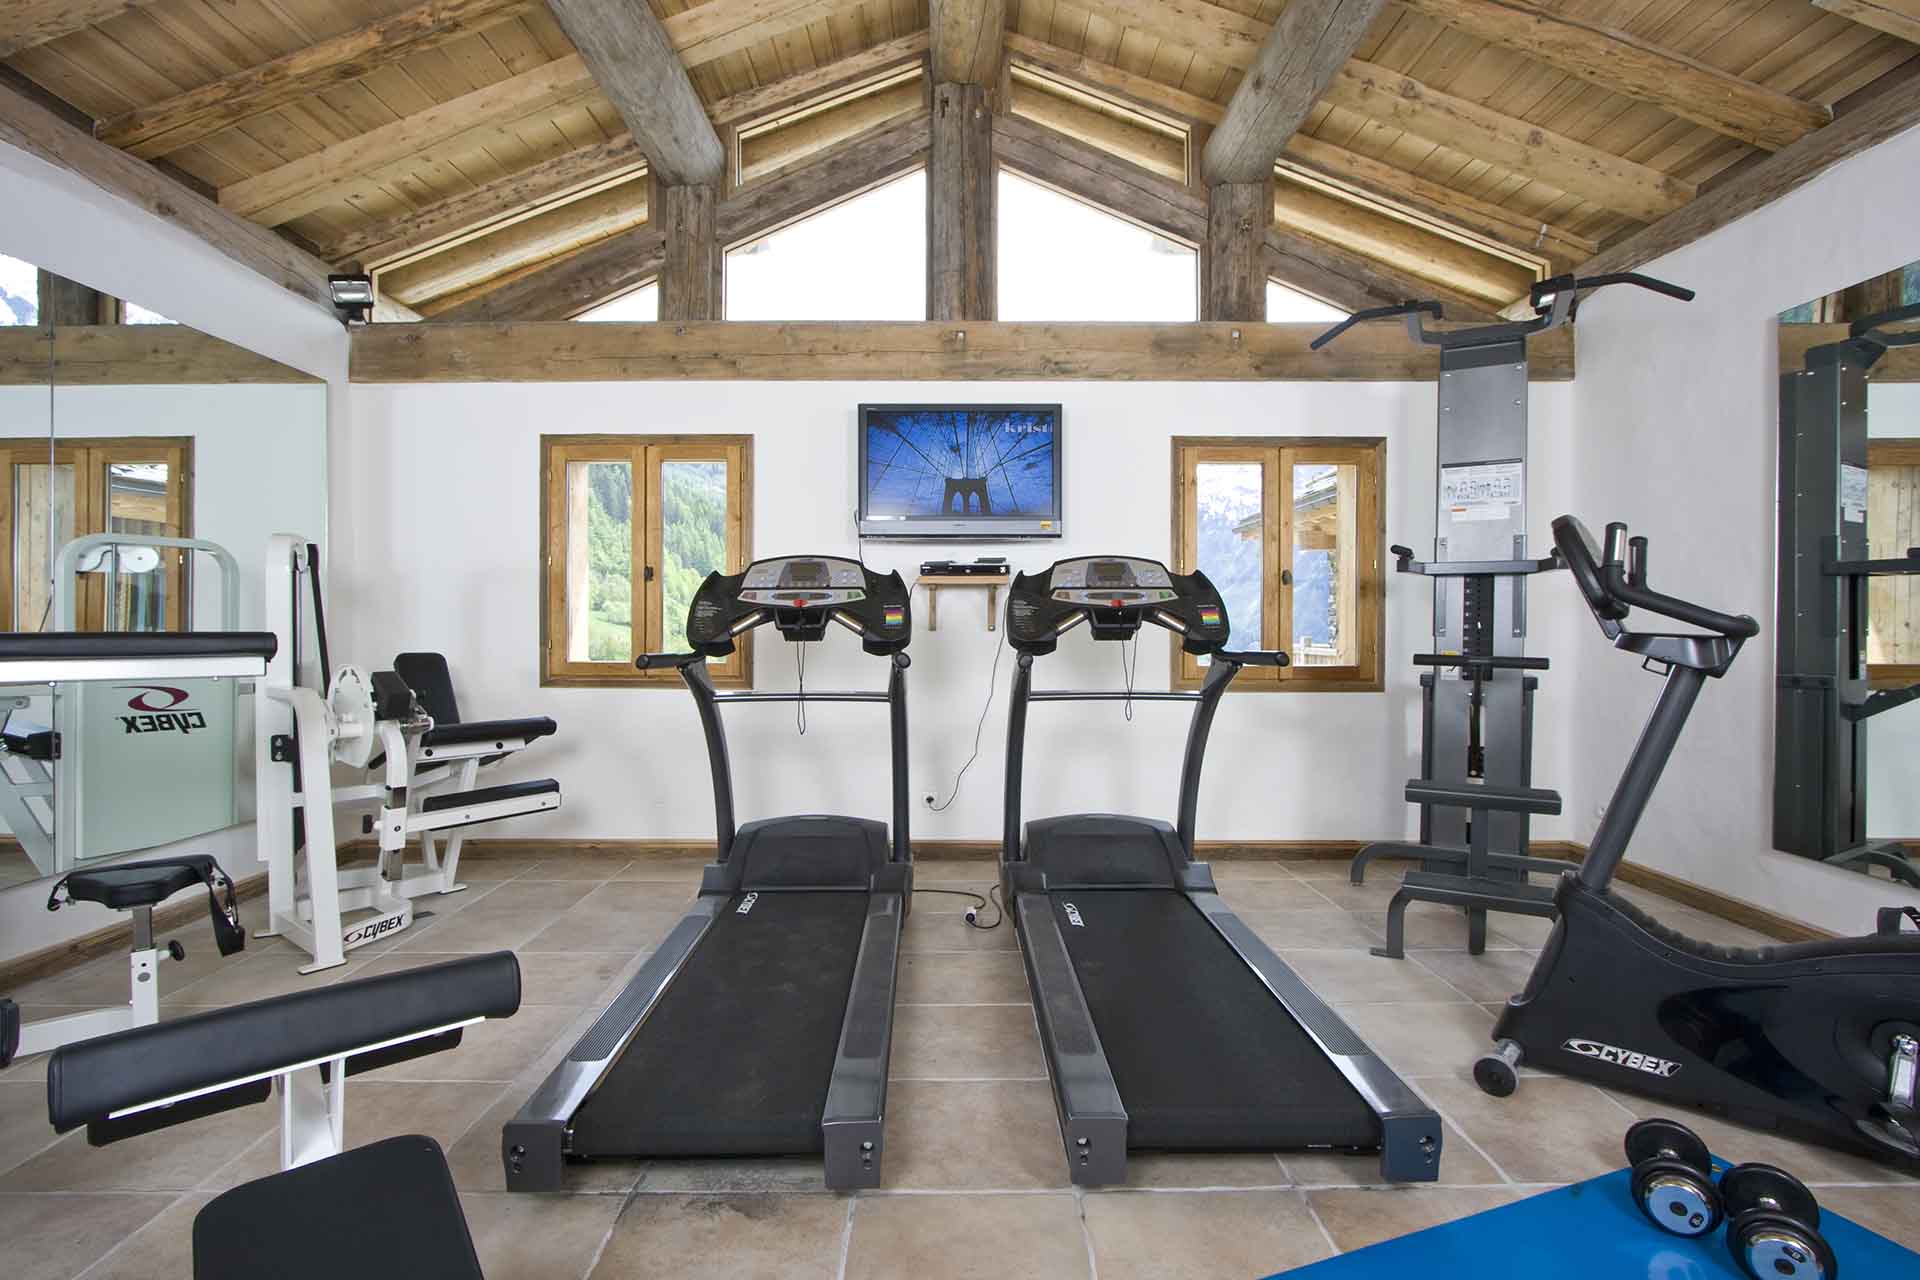 The gym at Chalet Merlo.